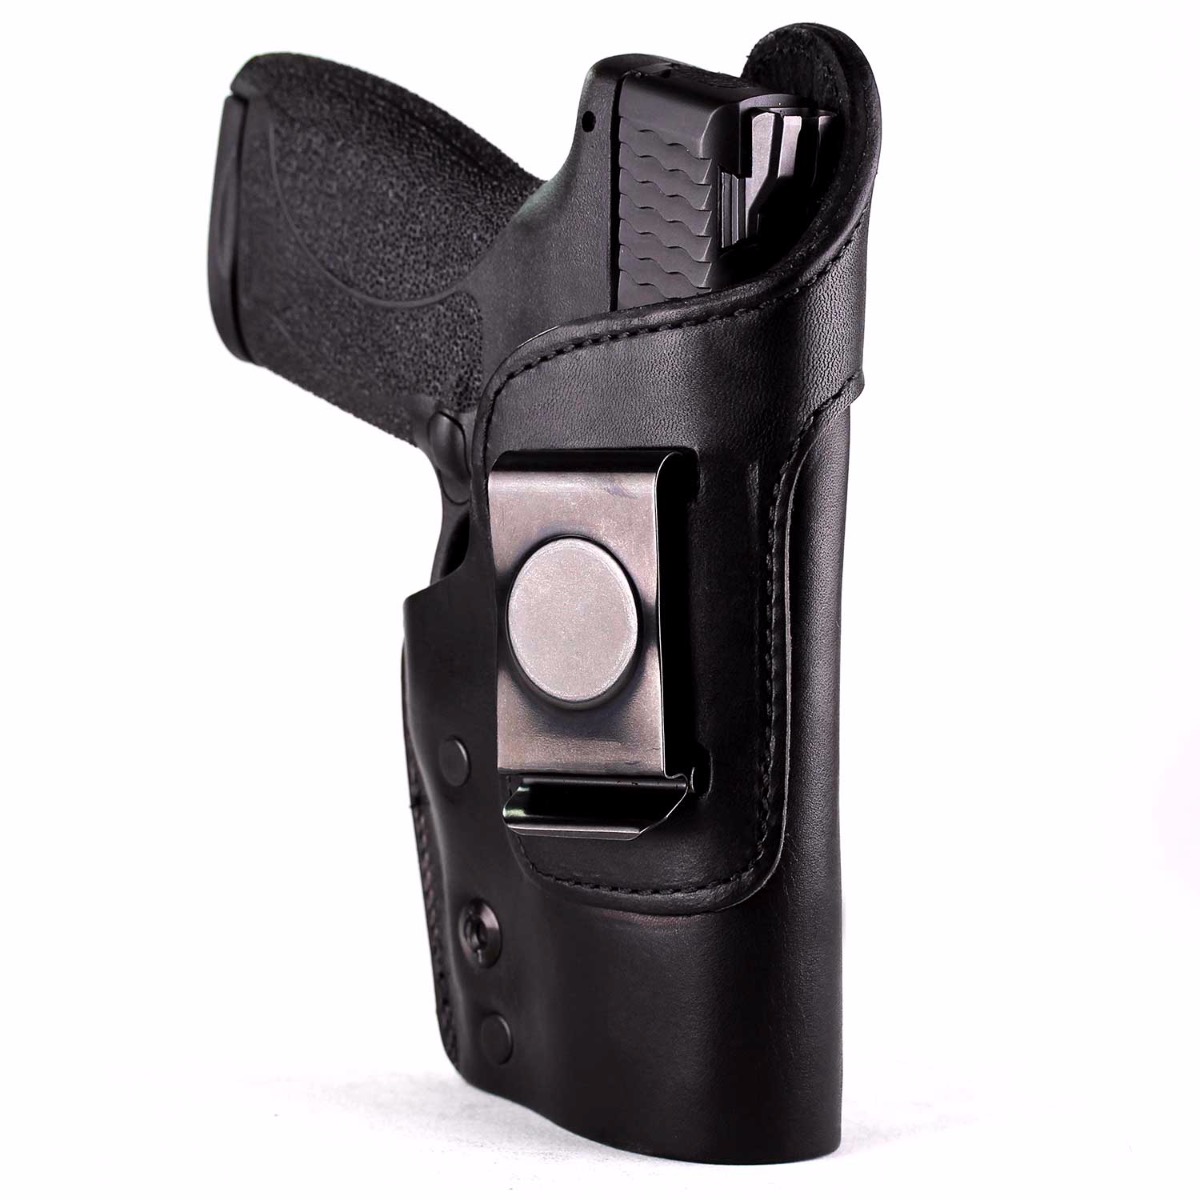 Details about   On Duty Conceal RH LH OWB Leather Gun Holster For Kel Tec P3AT 